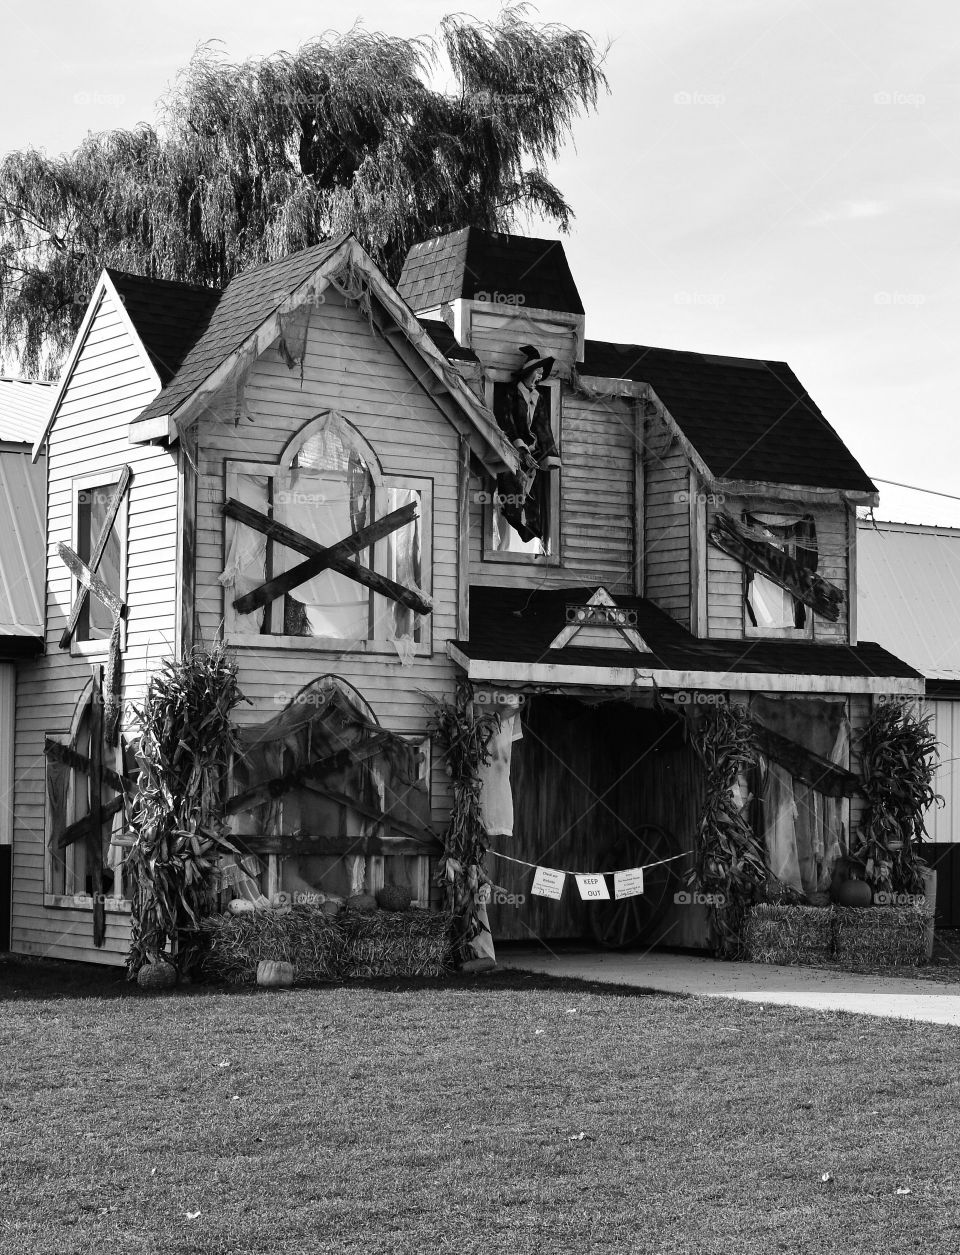 Haunted house in black and white